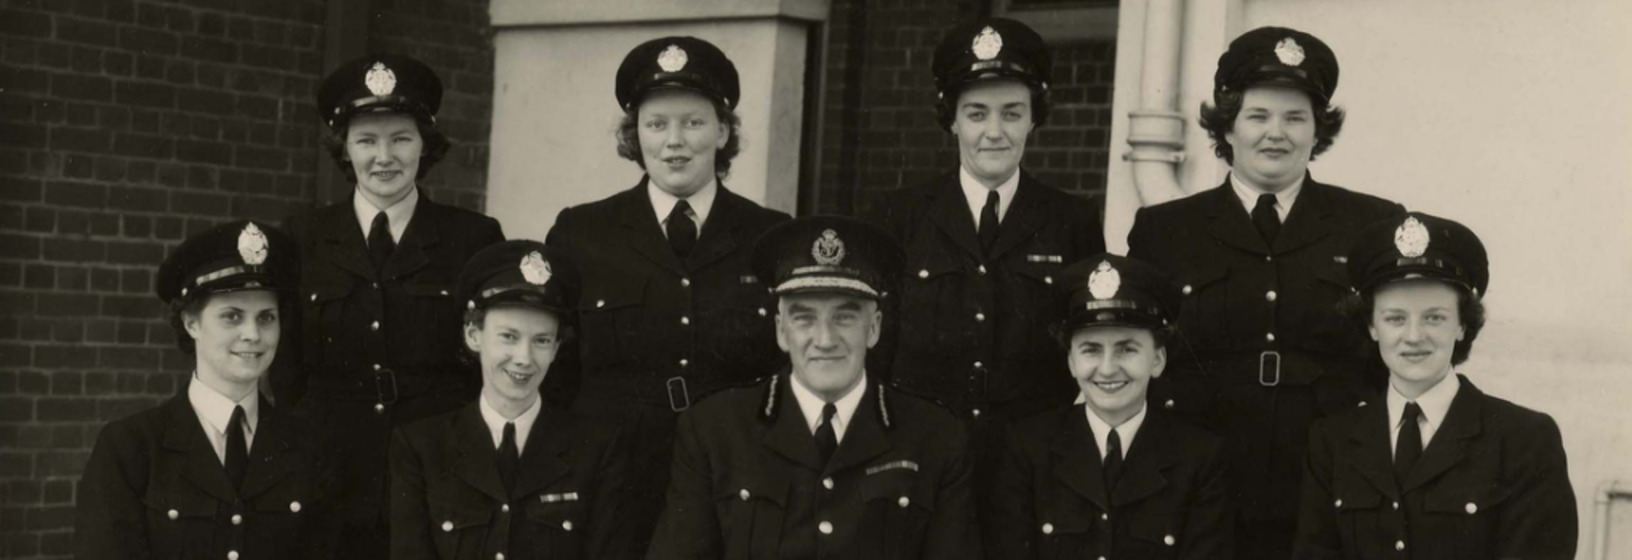 female police officers standing in two rows